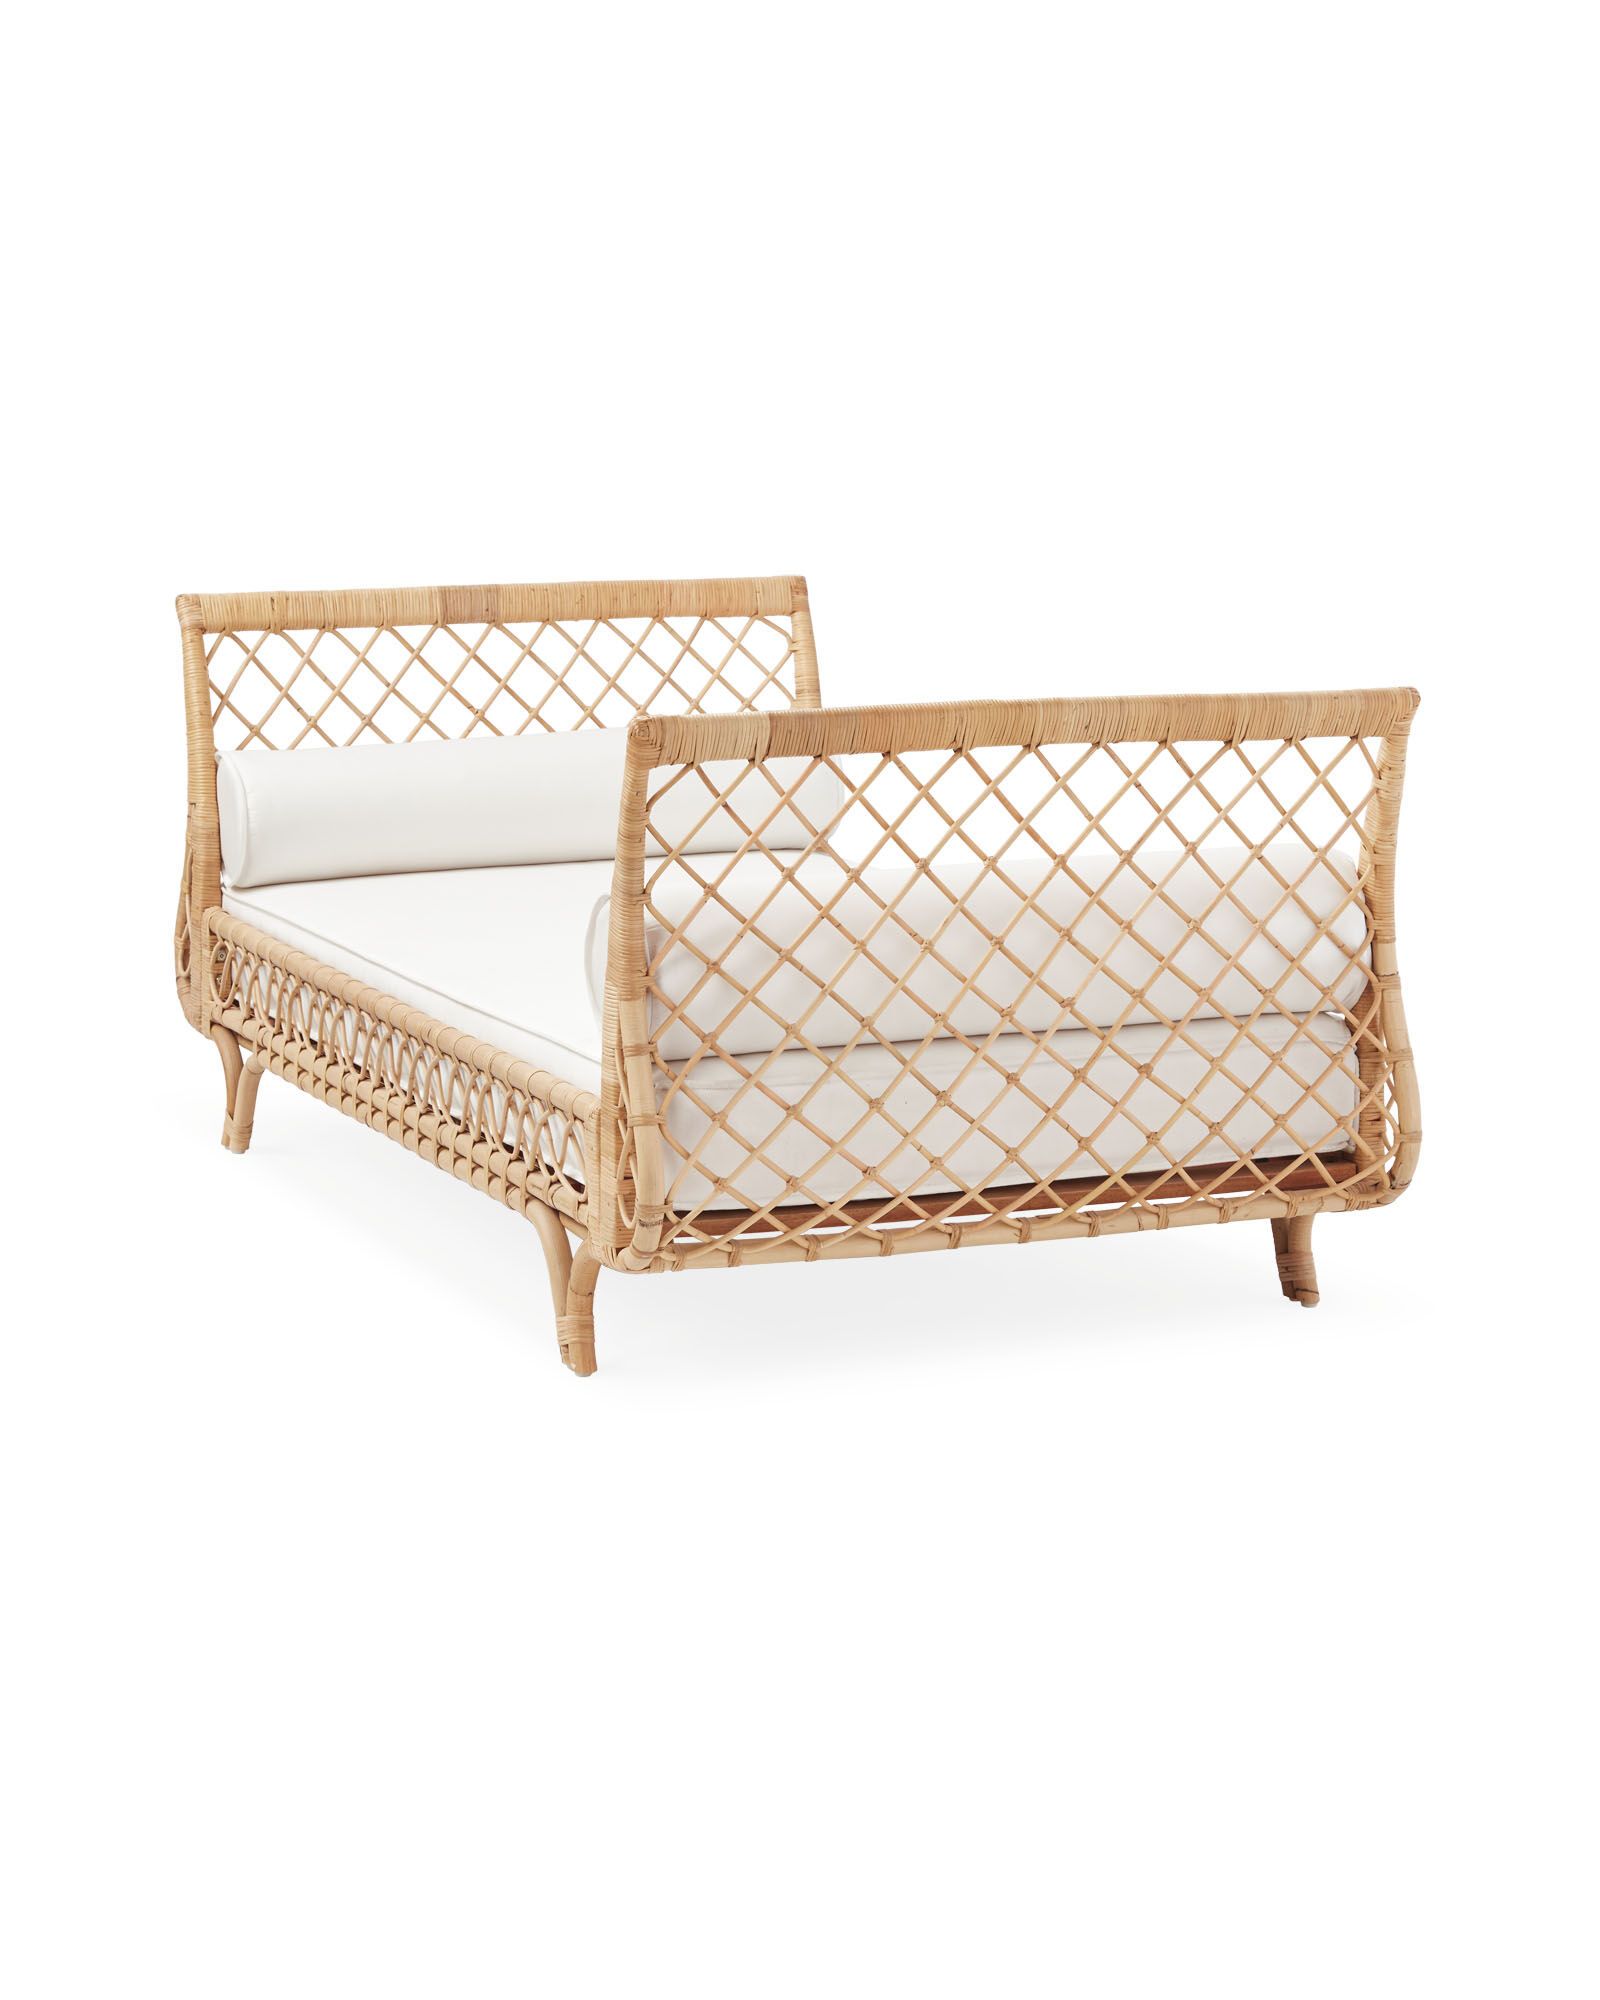 Avalon Daybed | Serena and Lily